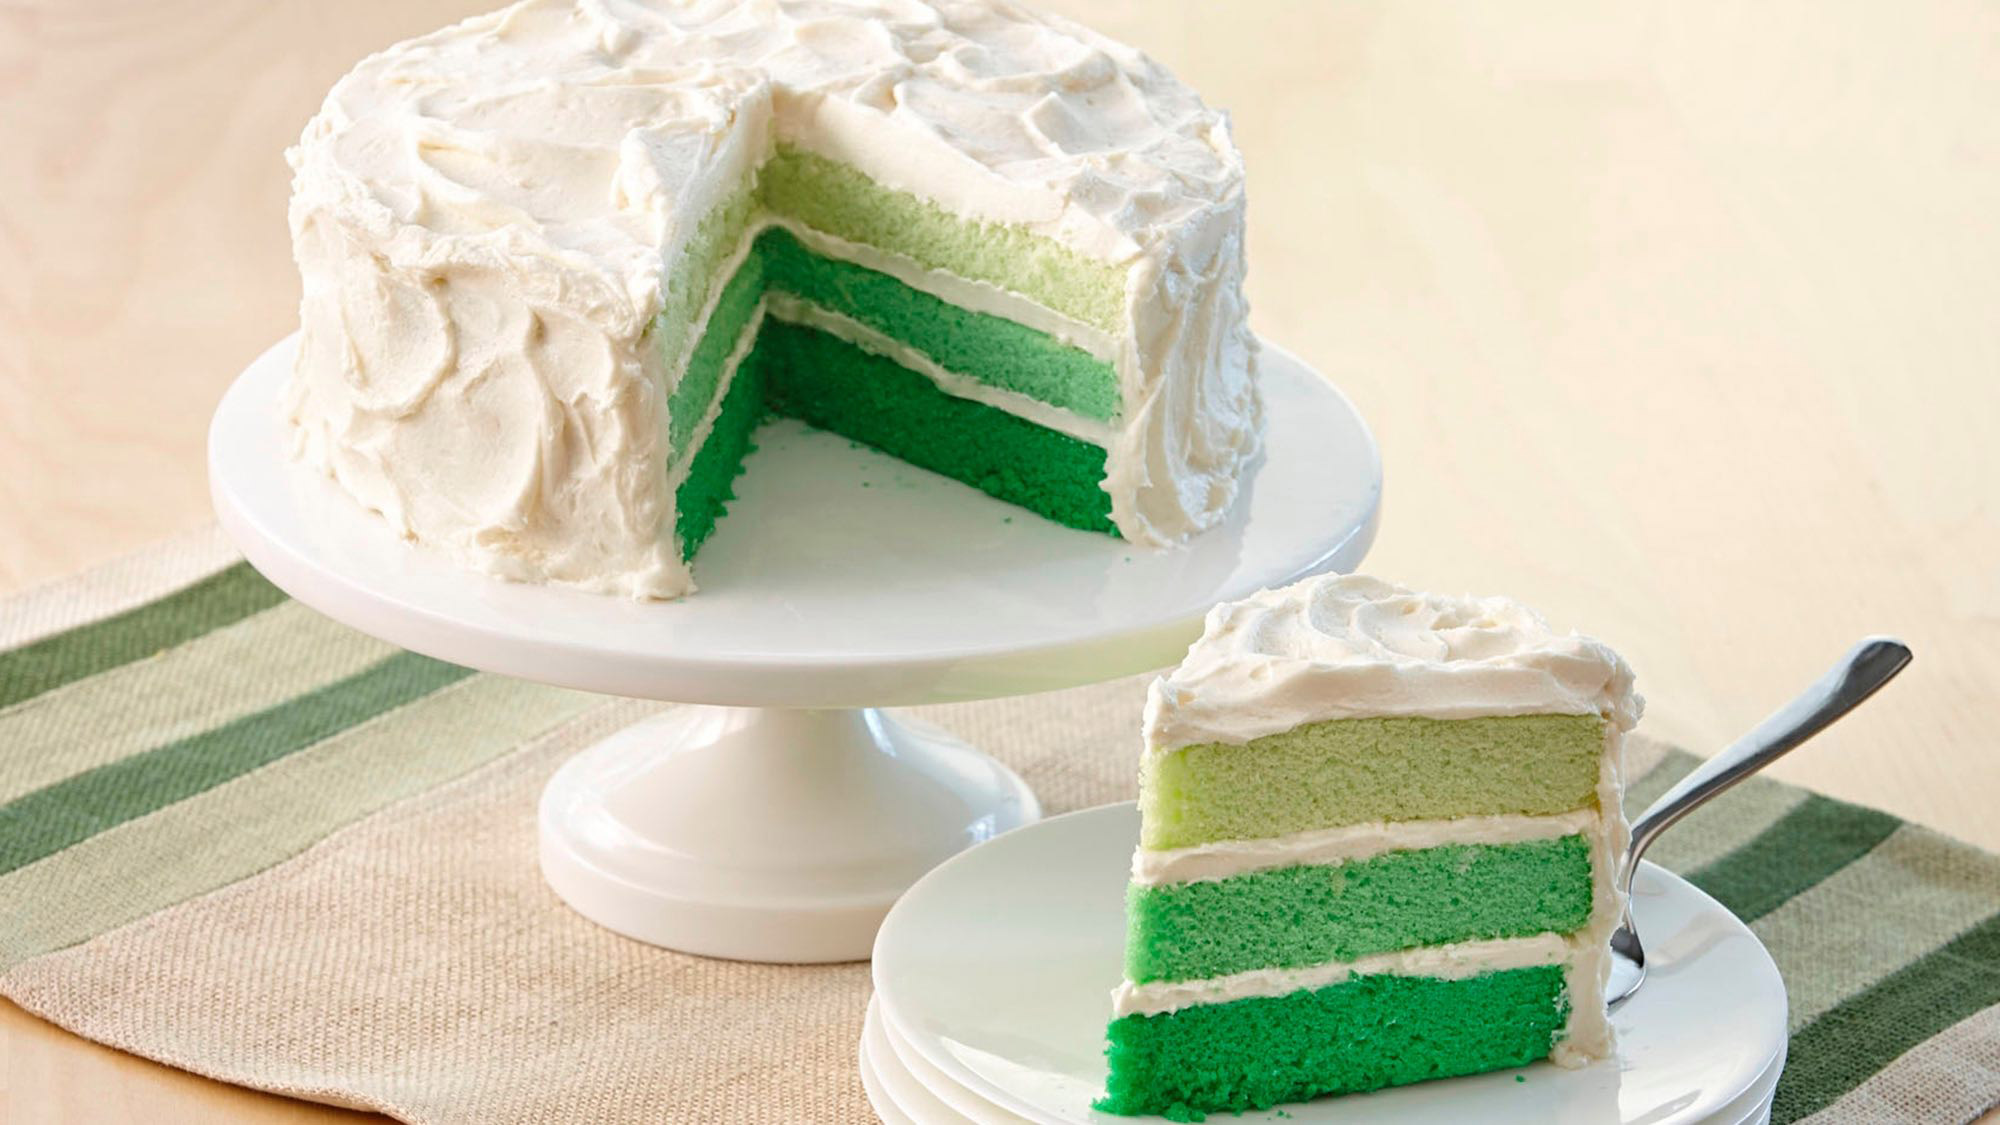 McCormick Ombre Cake